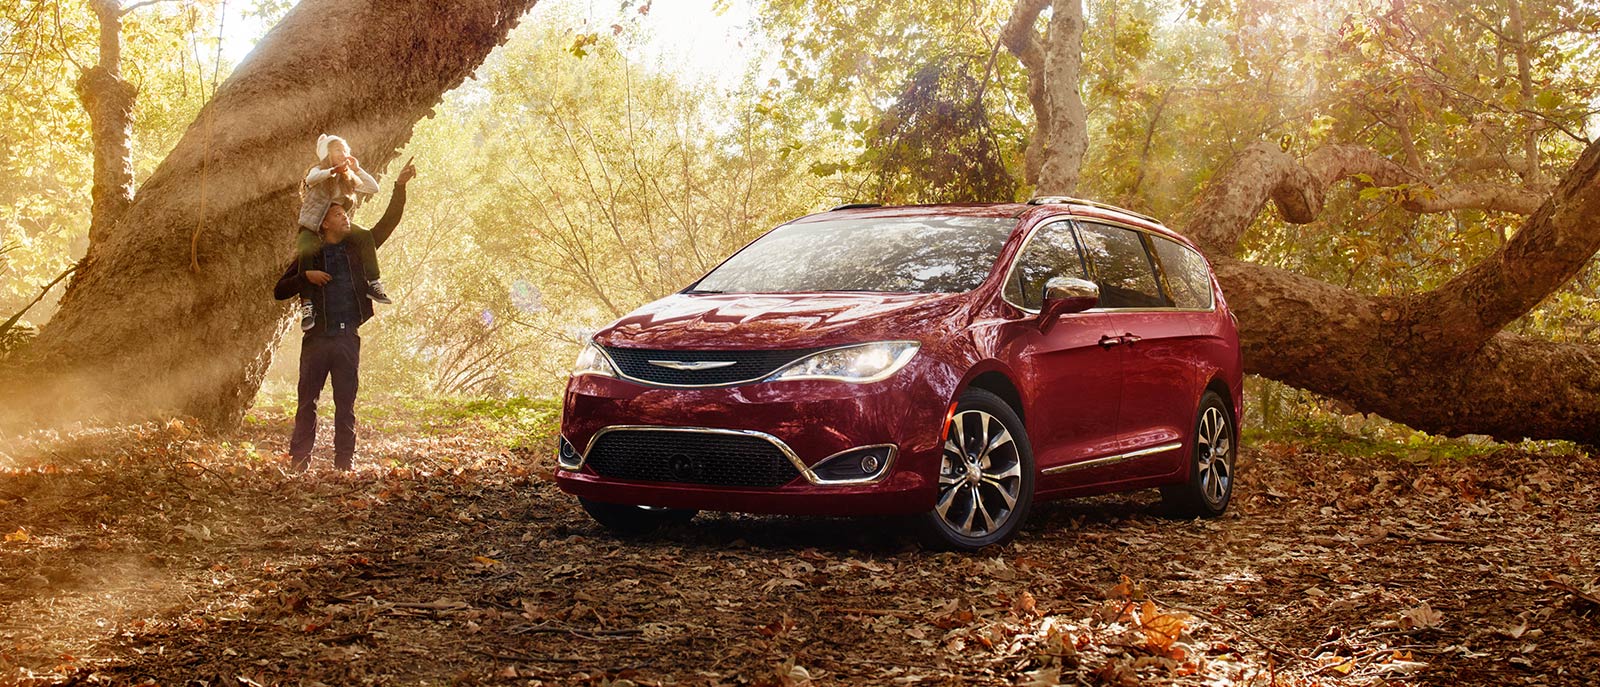 2017 Red Pacifica Exterior Forest